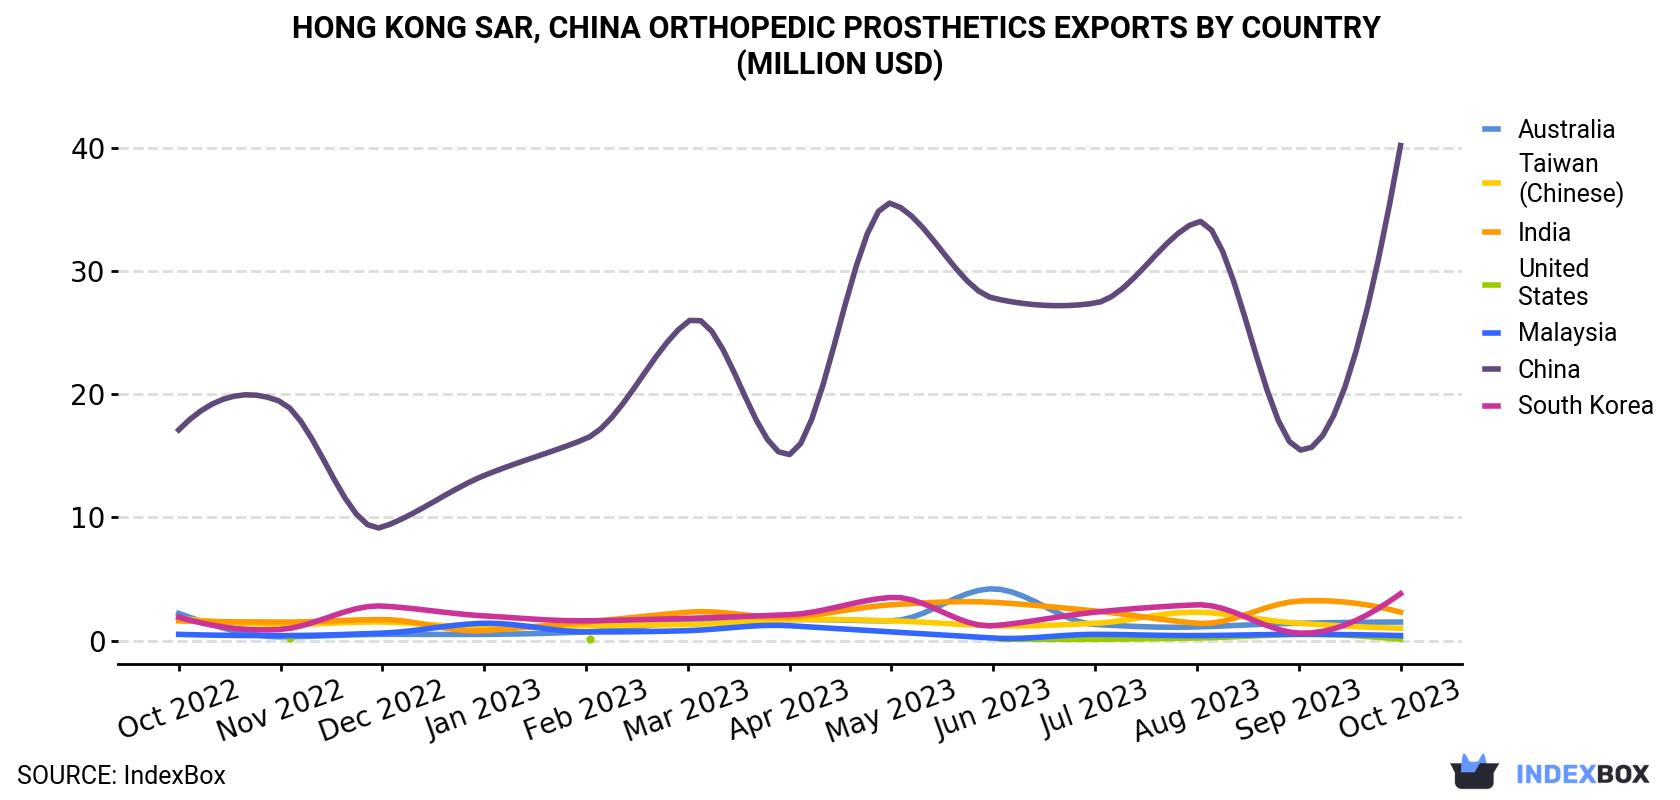 Hong Kong Orthopedic Prosthetics Exports By Country (Million USD)